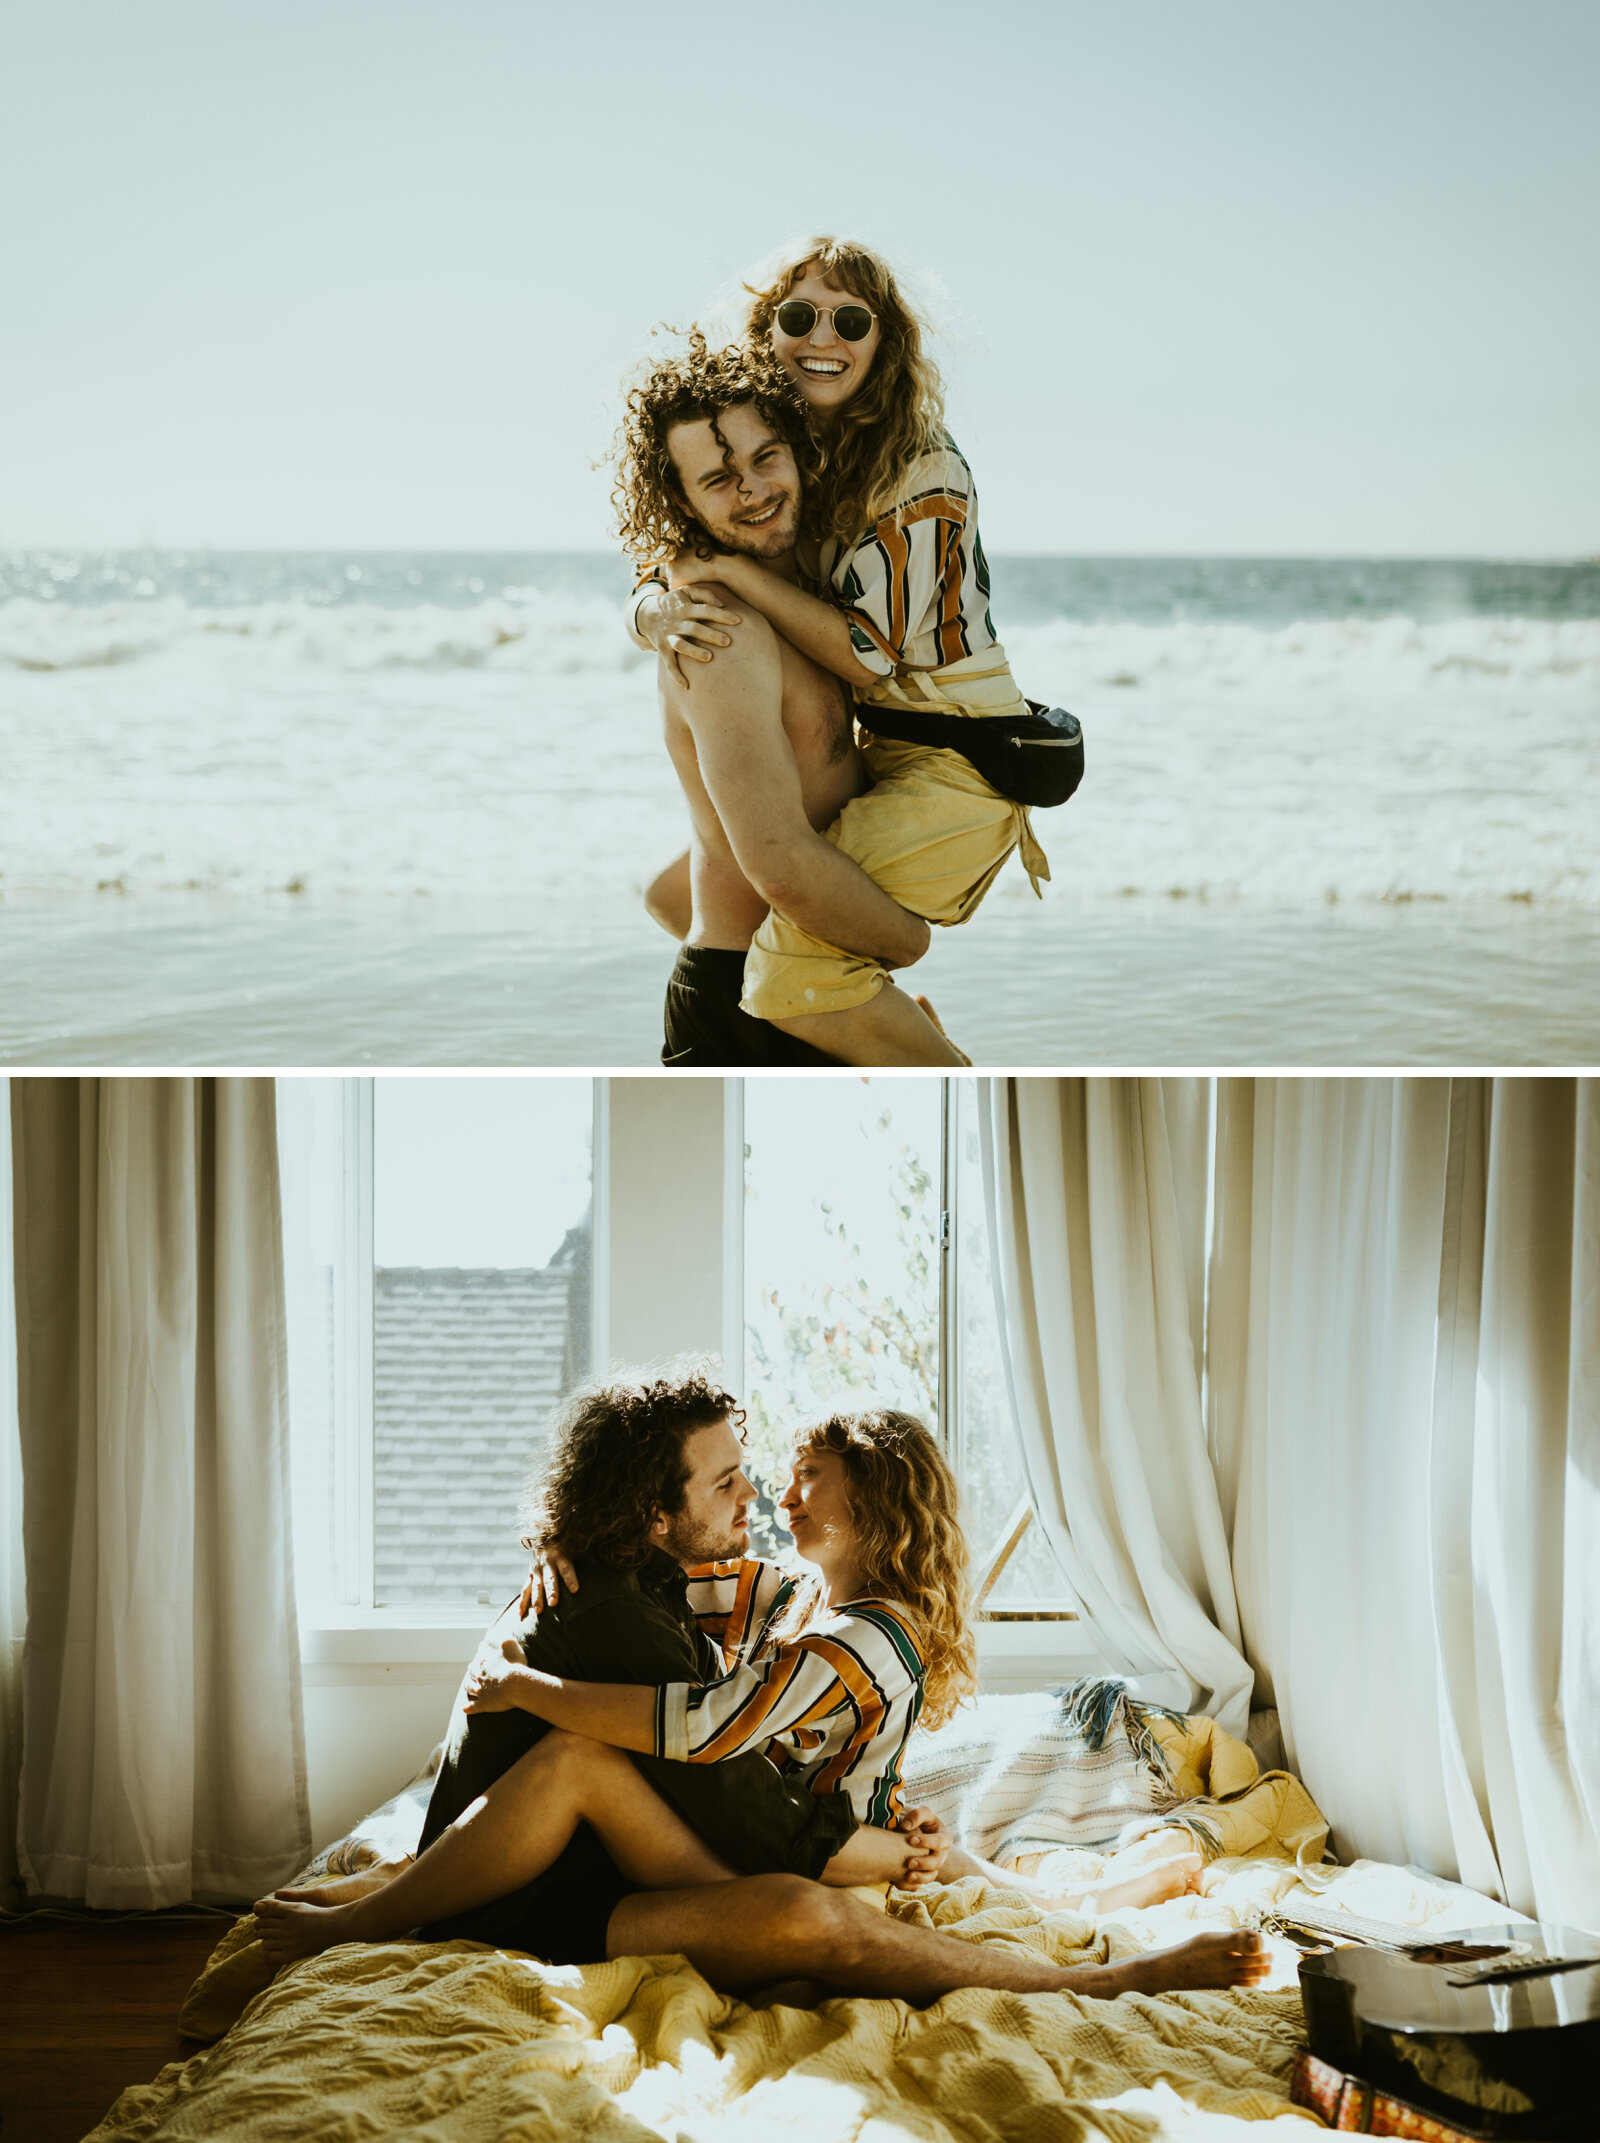 venice beach california couples session comfortable clothing inspiration for couples fanny pack casual outfit ideas for an engagement session.jpg